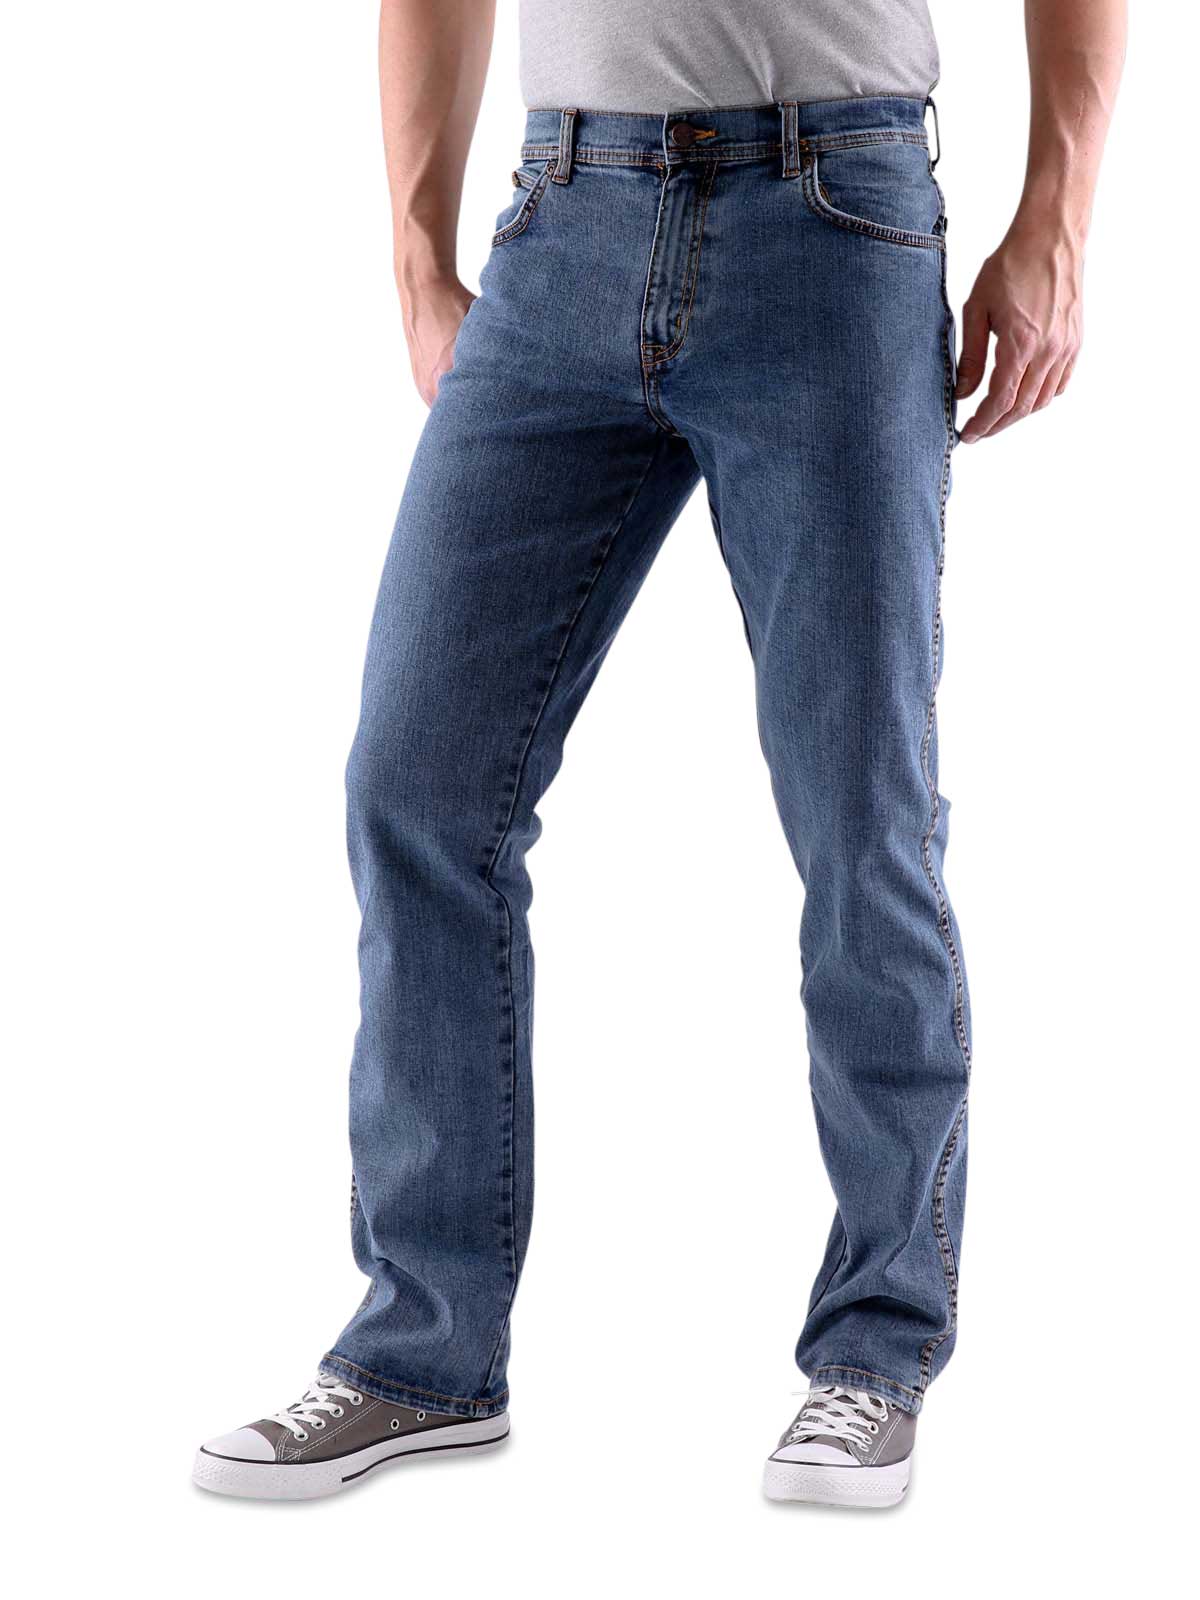 goud Hoe Voornaamwoord Wrangler Texas Stretch Jeans stonewash 3-Pack Wrangler Men's Jeans | Free  Shipping on BEBASIC.CH - SIMPLY LOOK GOOD